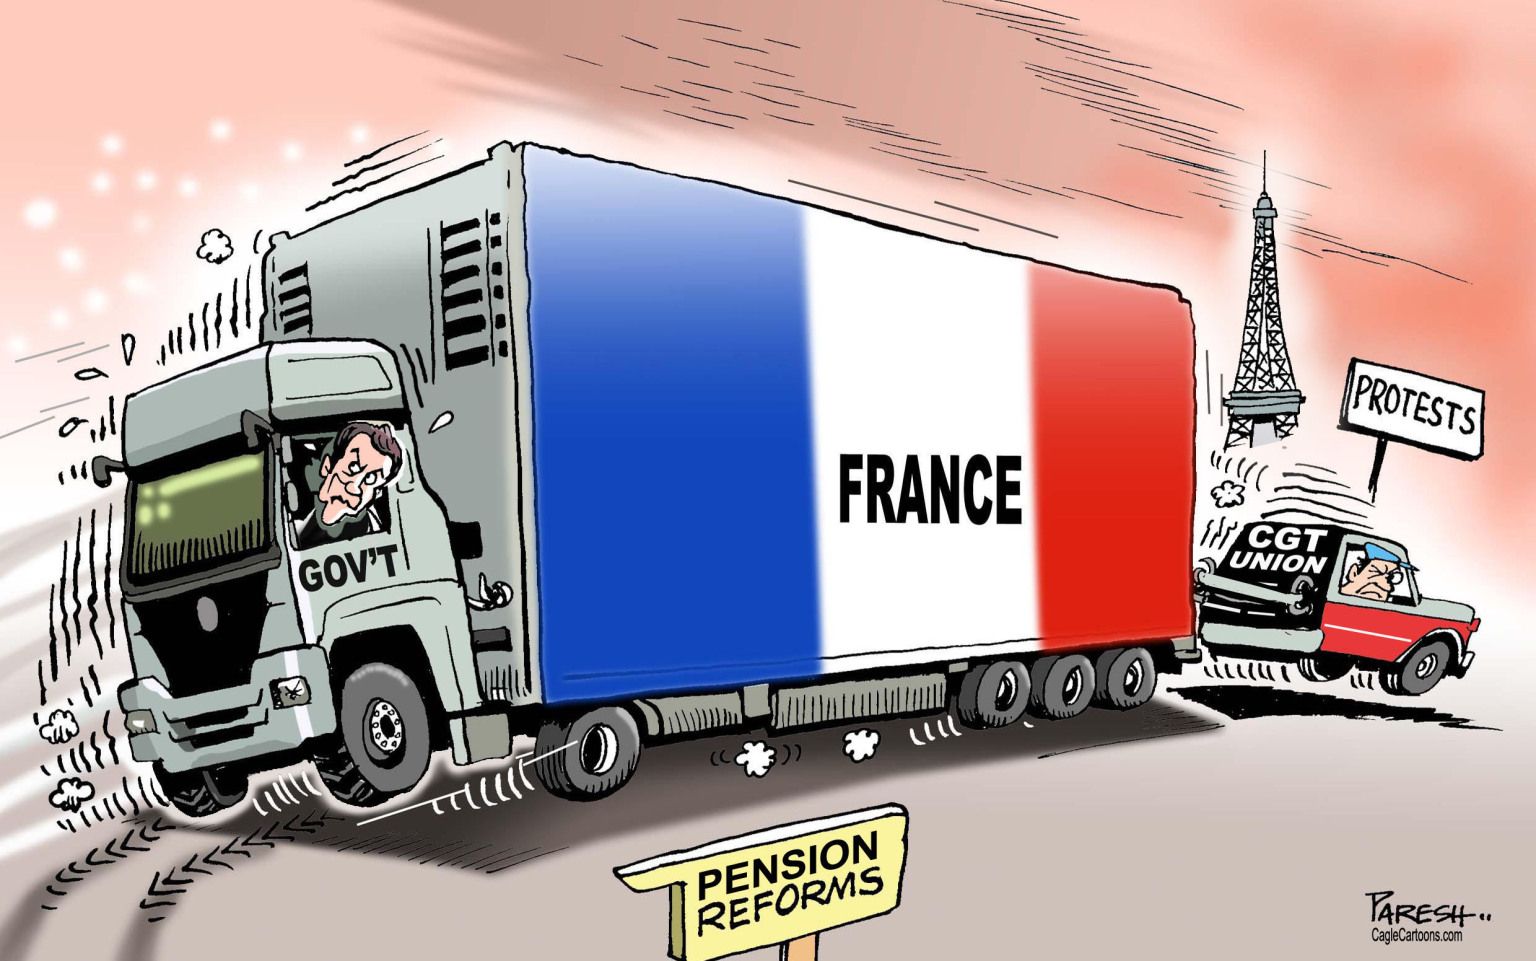 newsjustin.press - French pension protests - editorial political cartoon